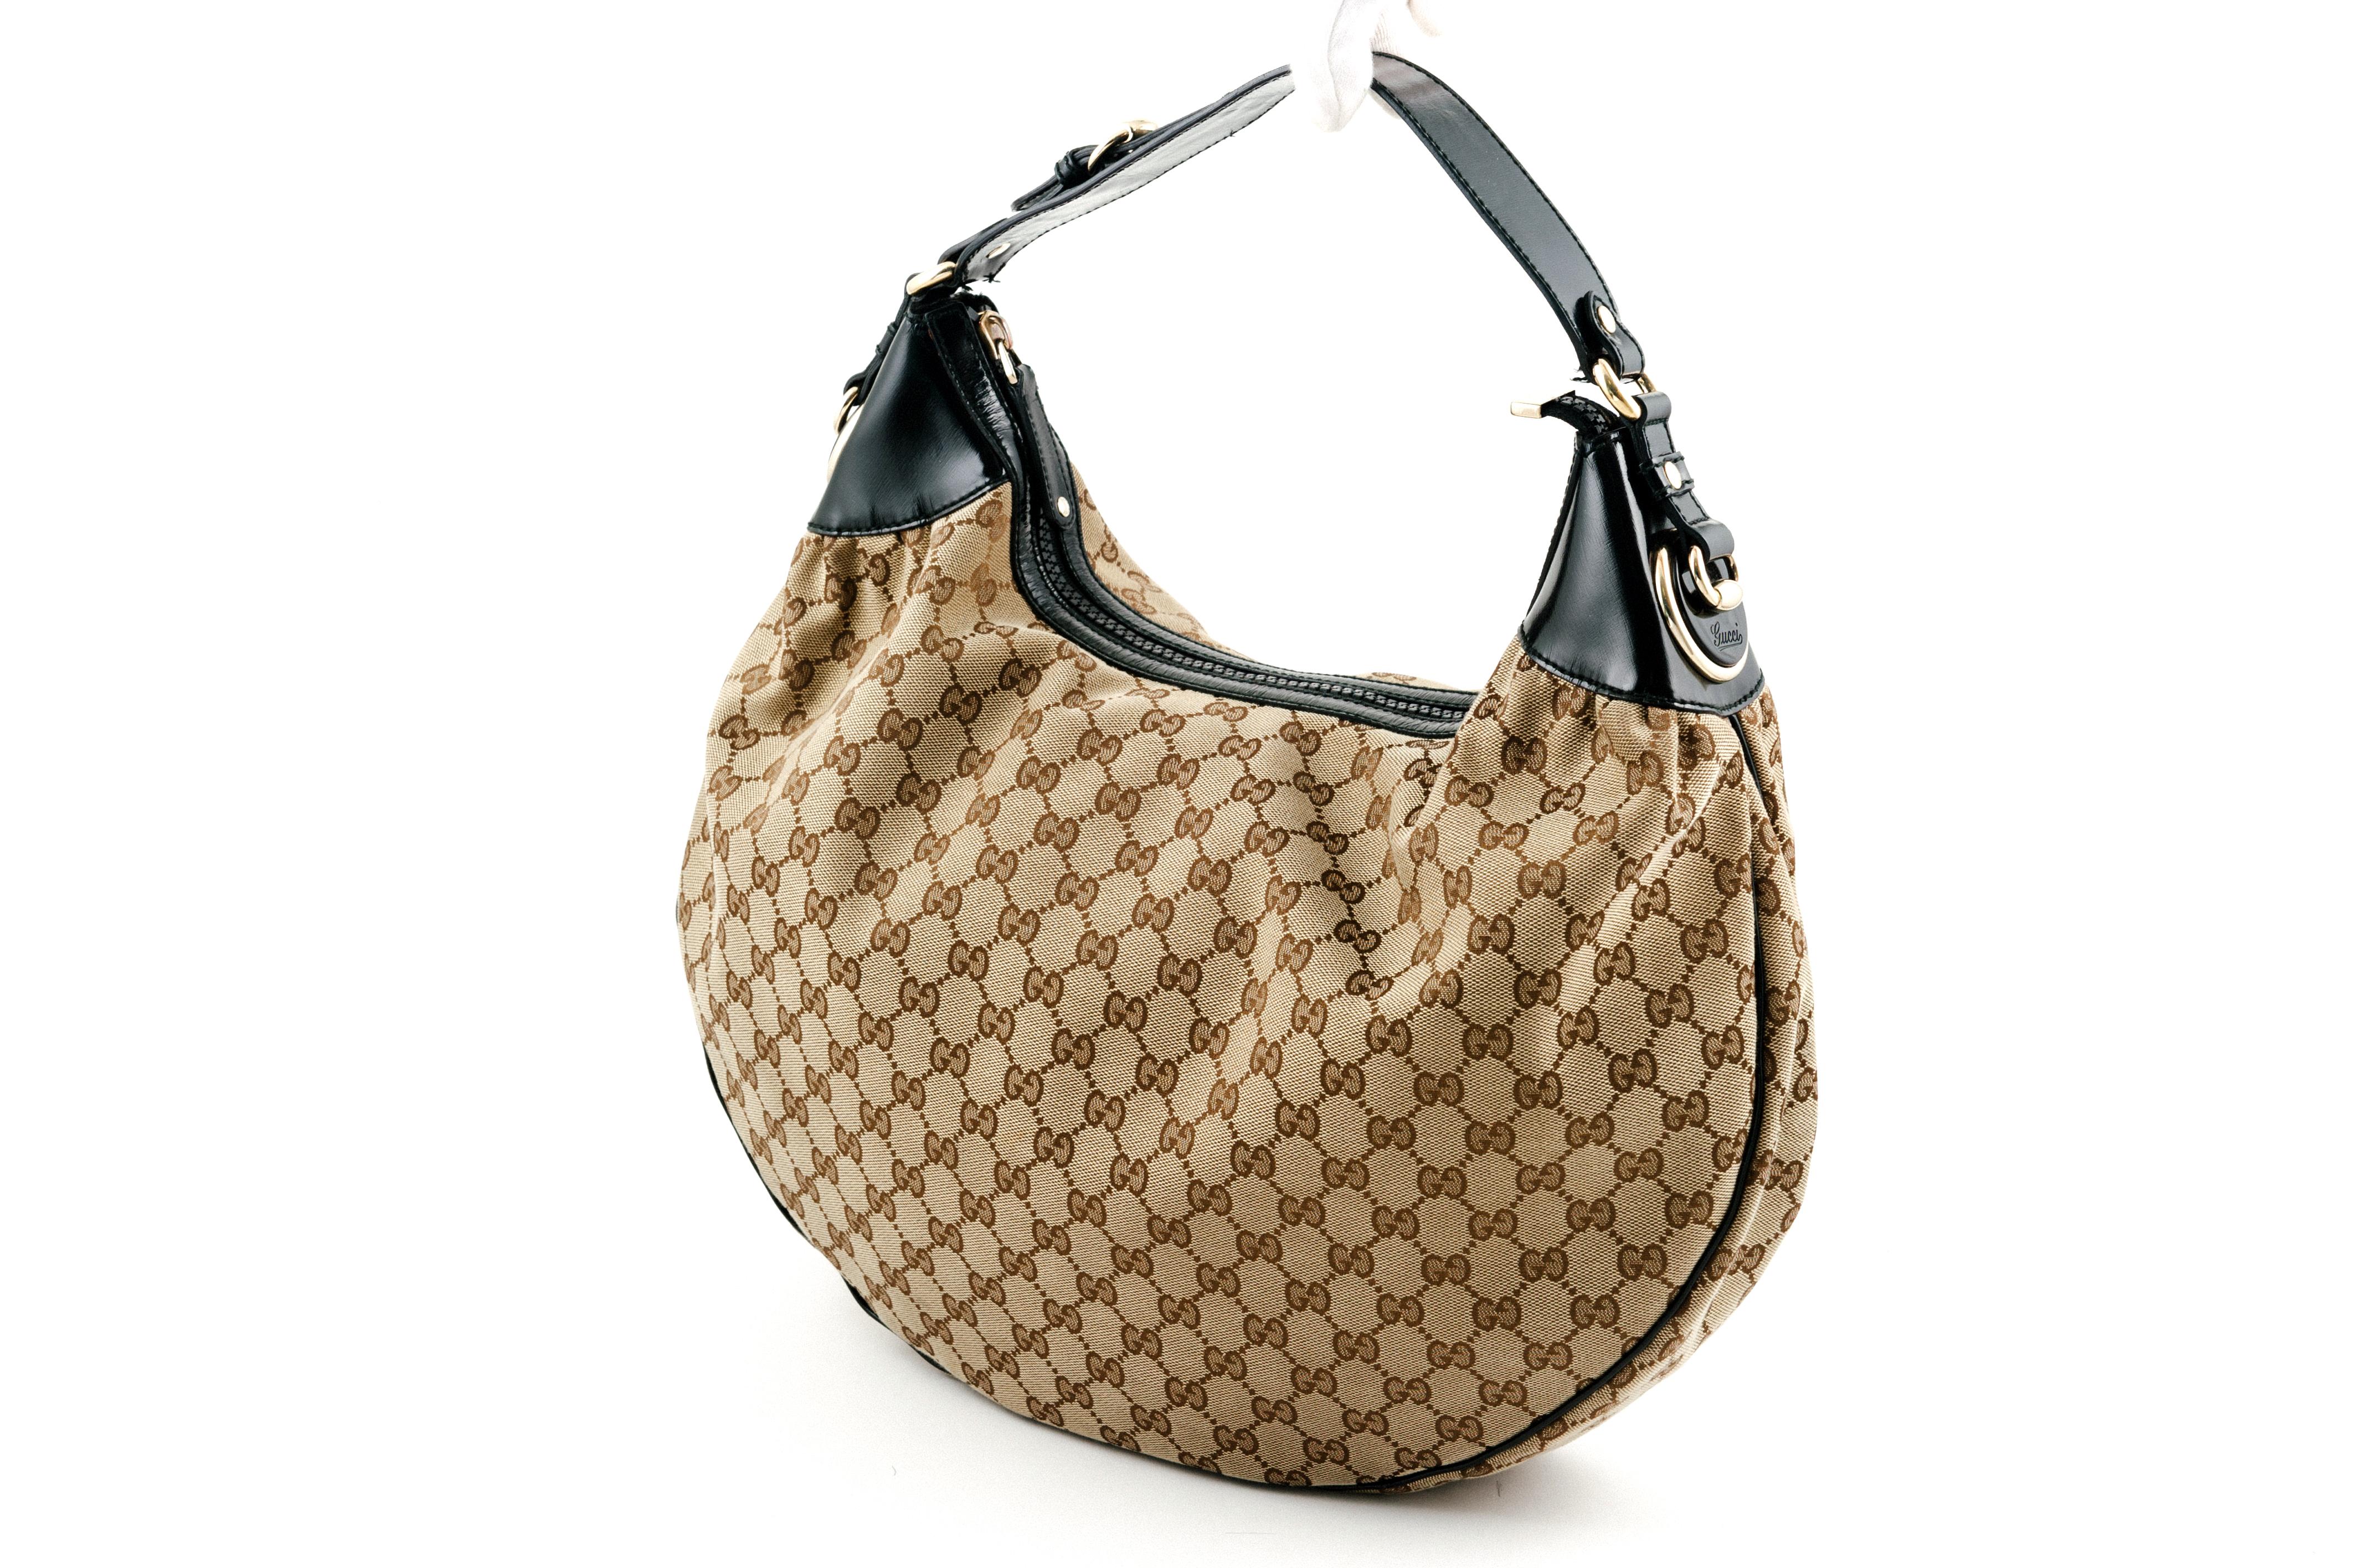 The model Hobo  is one of the most famous reference from the luxury House . Declined in many colors and materials, here it is offered in Brown Monogrammed Canvas and Gold hardware. This product is rated as condition AA. That means the product is in